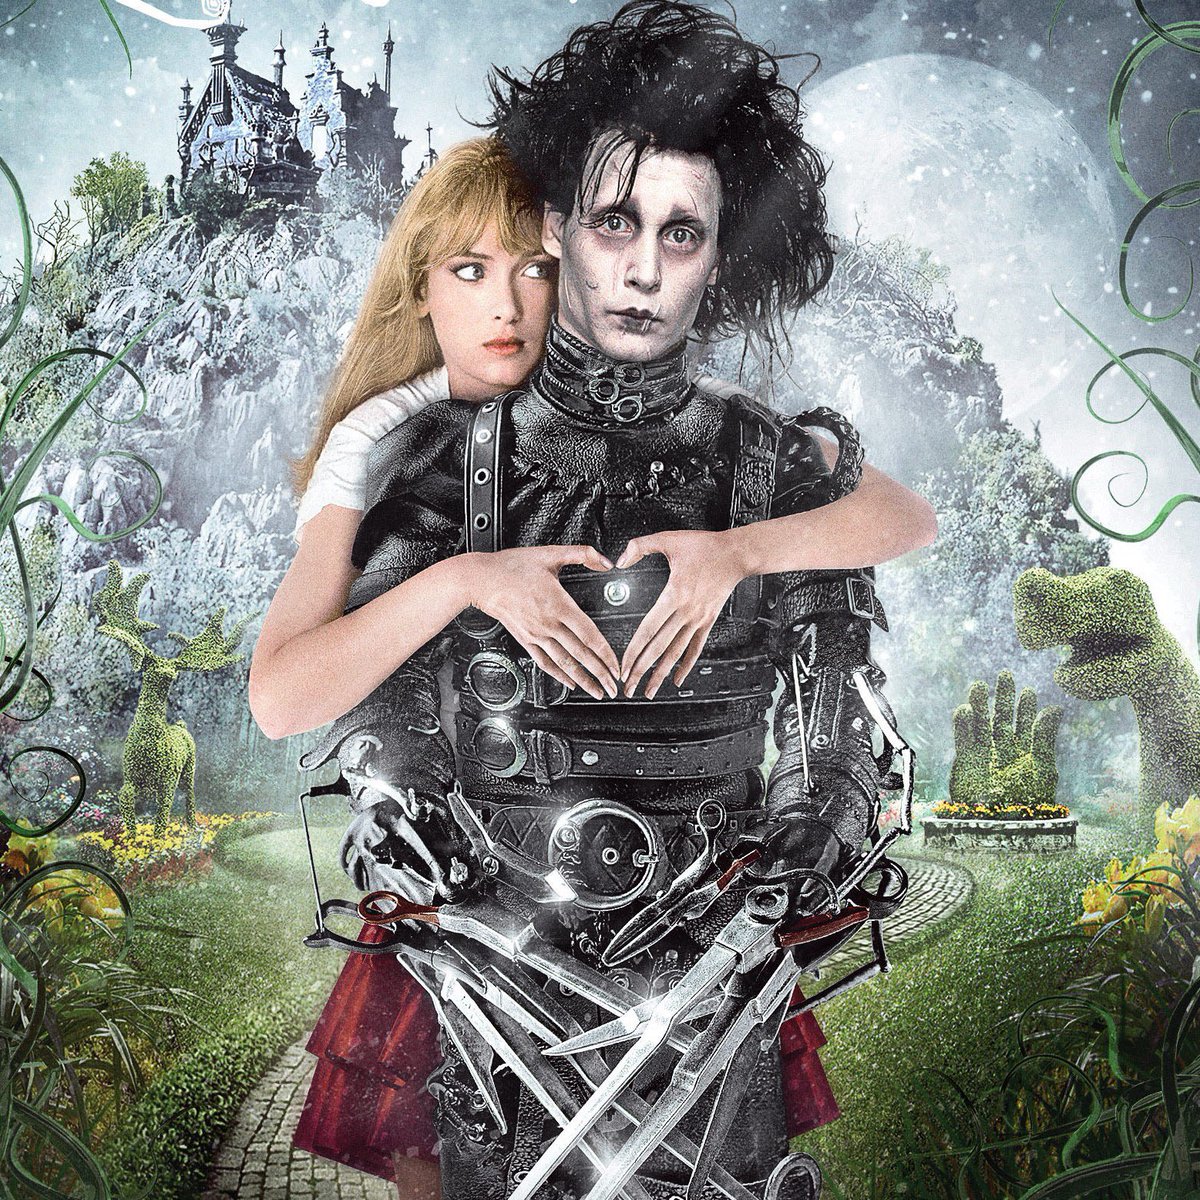 Tom Cruise was offered the role of Edward Scissorhands in Tim Burton’s movie of the same name but turned it down because Burton couldn’t answer specific questions, like how the character went to the bathroom, for him.